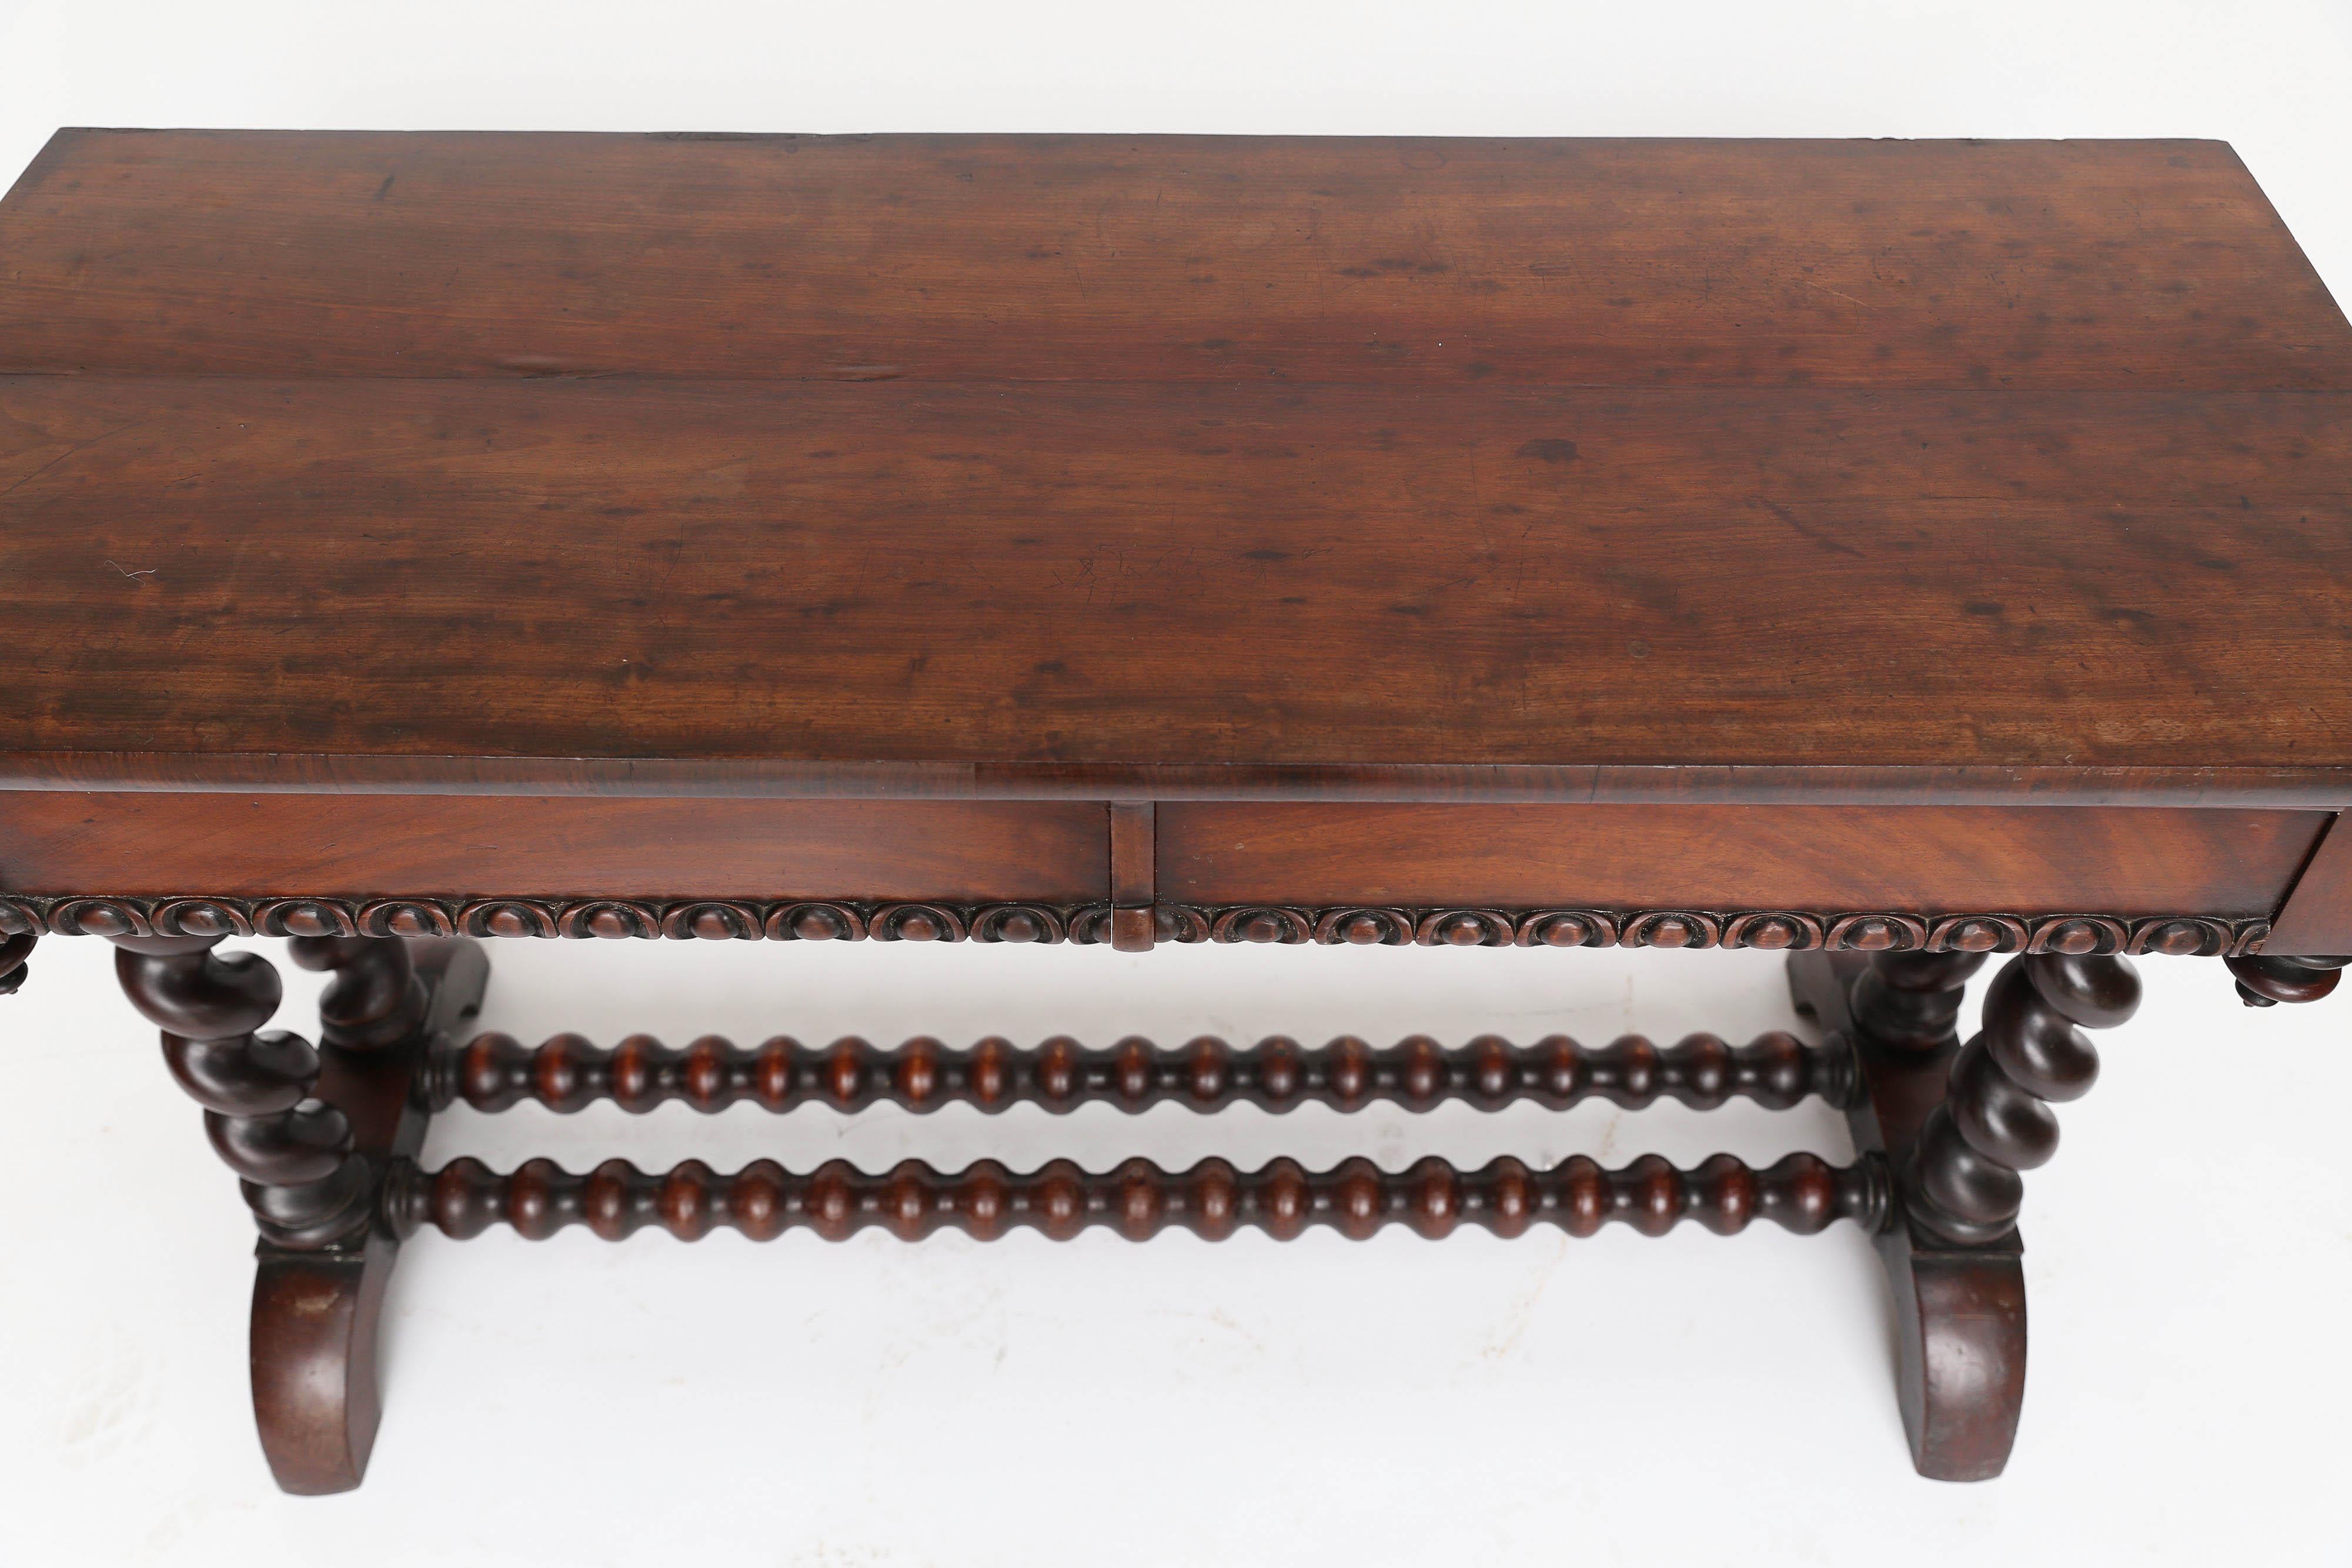 Beautiful 19th century barley twist console table found in England. The carved two drawers on the front are almost hidden as they blend with the construction of the table. The piece stands on four hand-turned barley twist legs joined by two barley